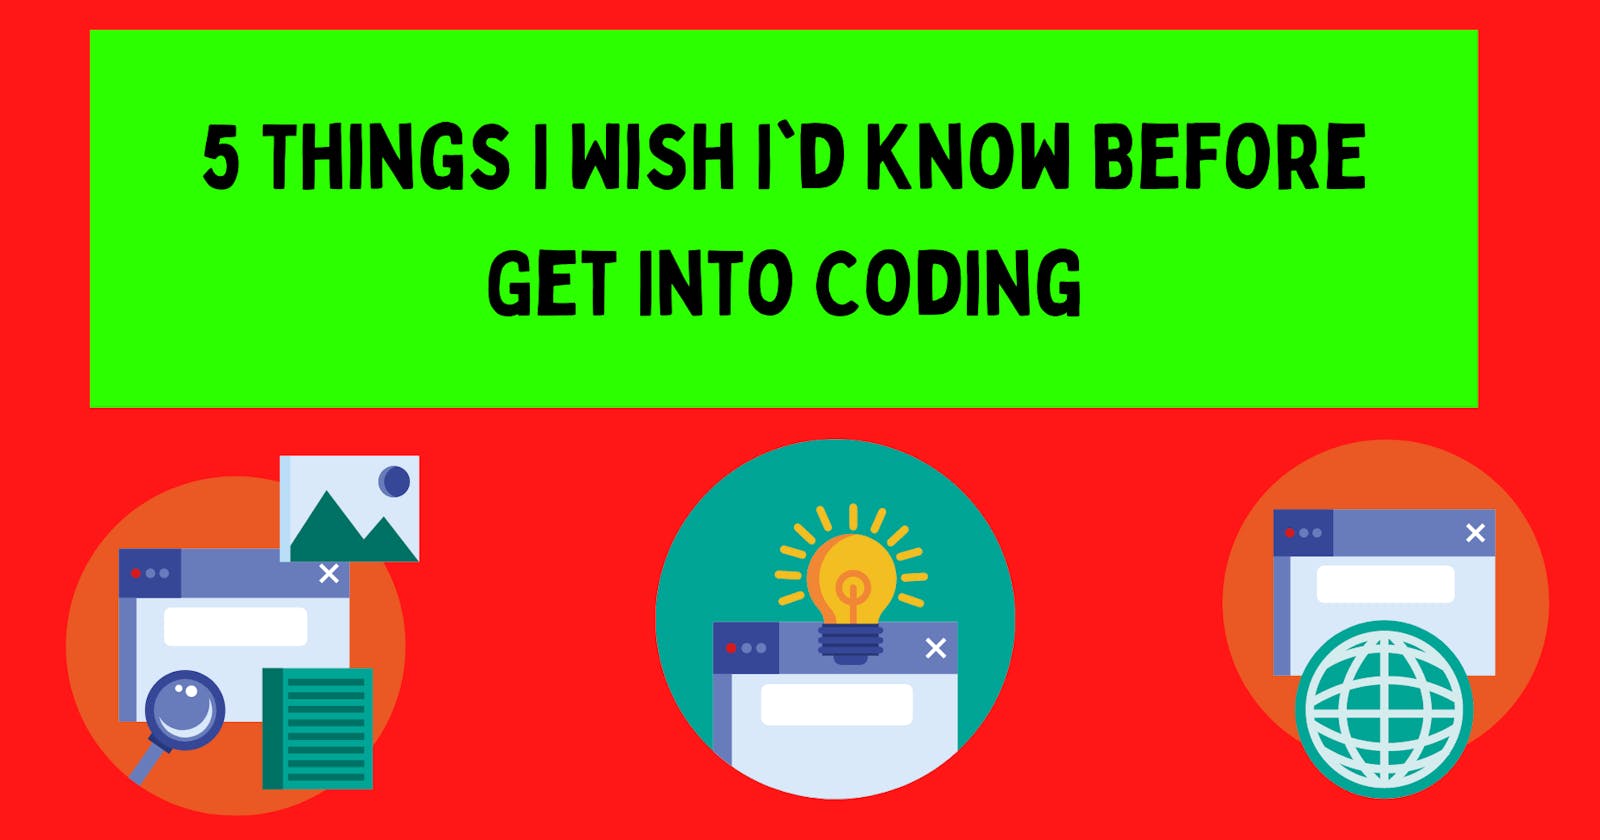 5 Things I Wish I'd Know Before Get Into Coding